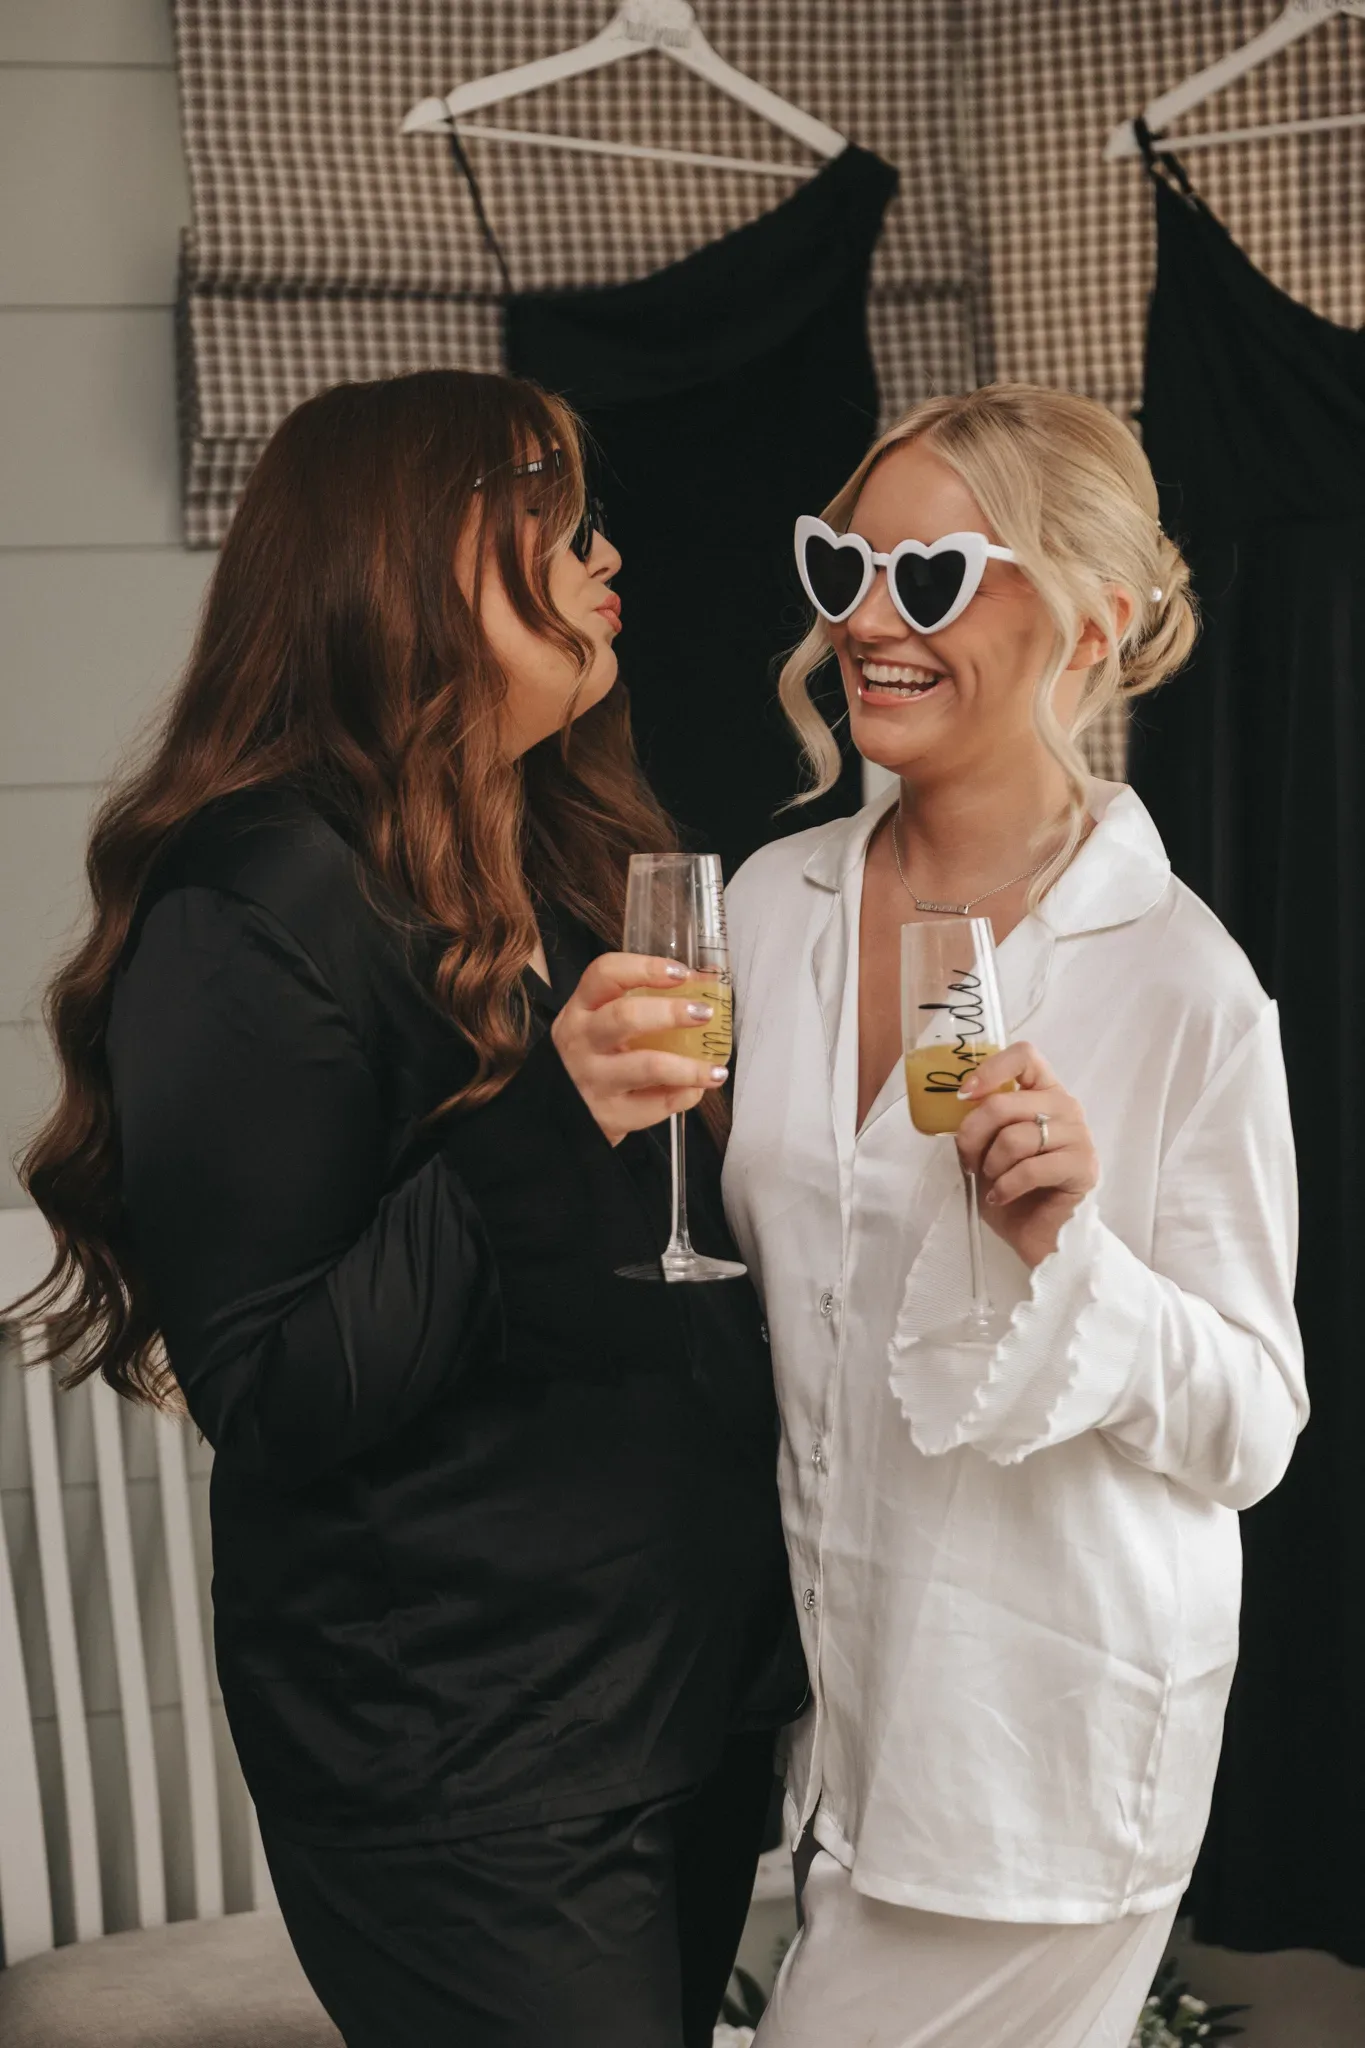 Two women, one with heart-shaped sunglasses, smiling and clinking champagne glasses, dressed in stylish black and white outfits, standing in a room with a patterned backdrop.